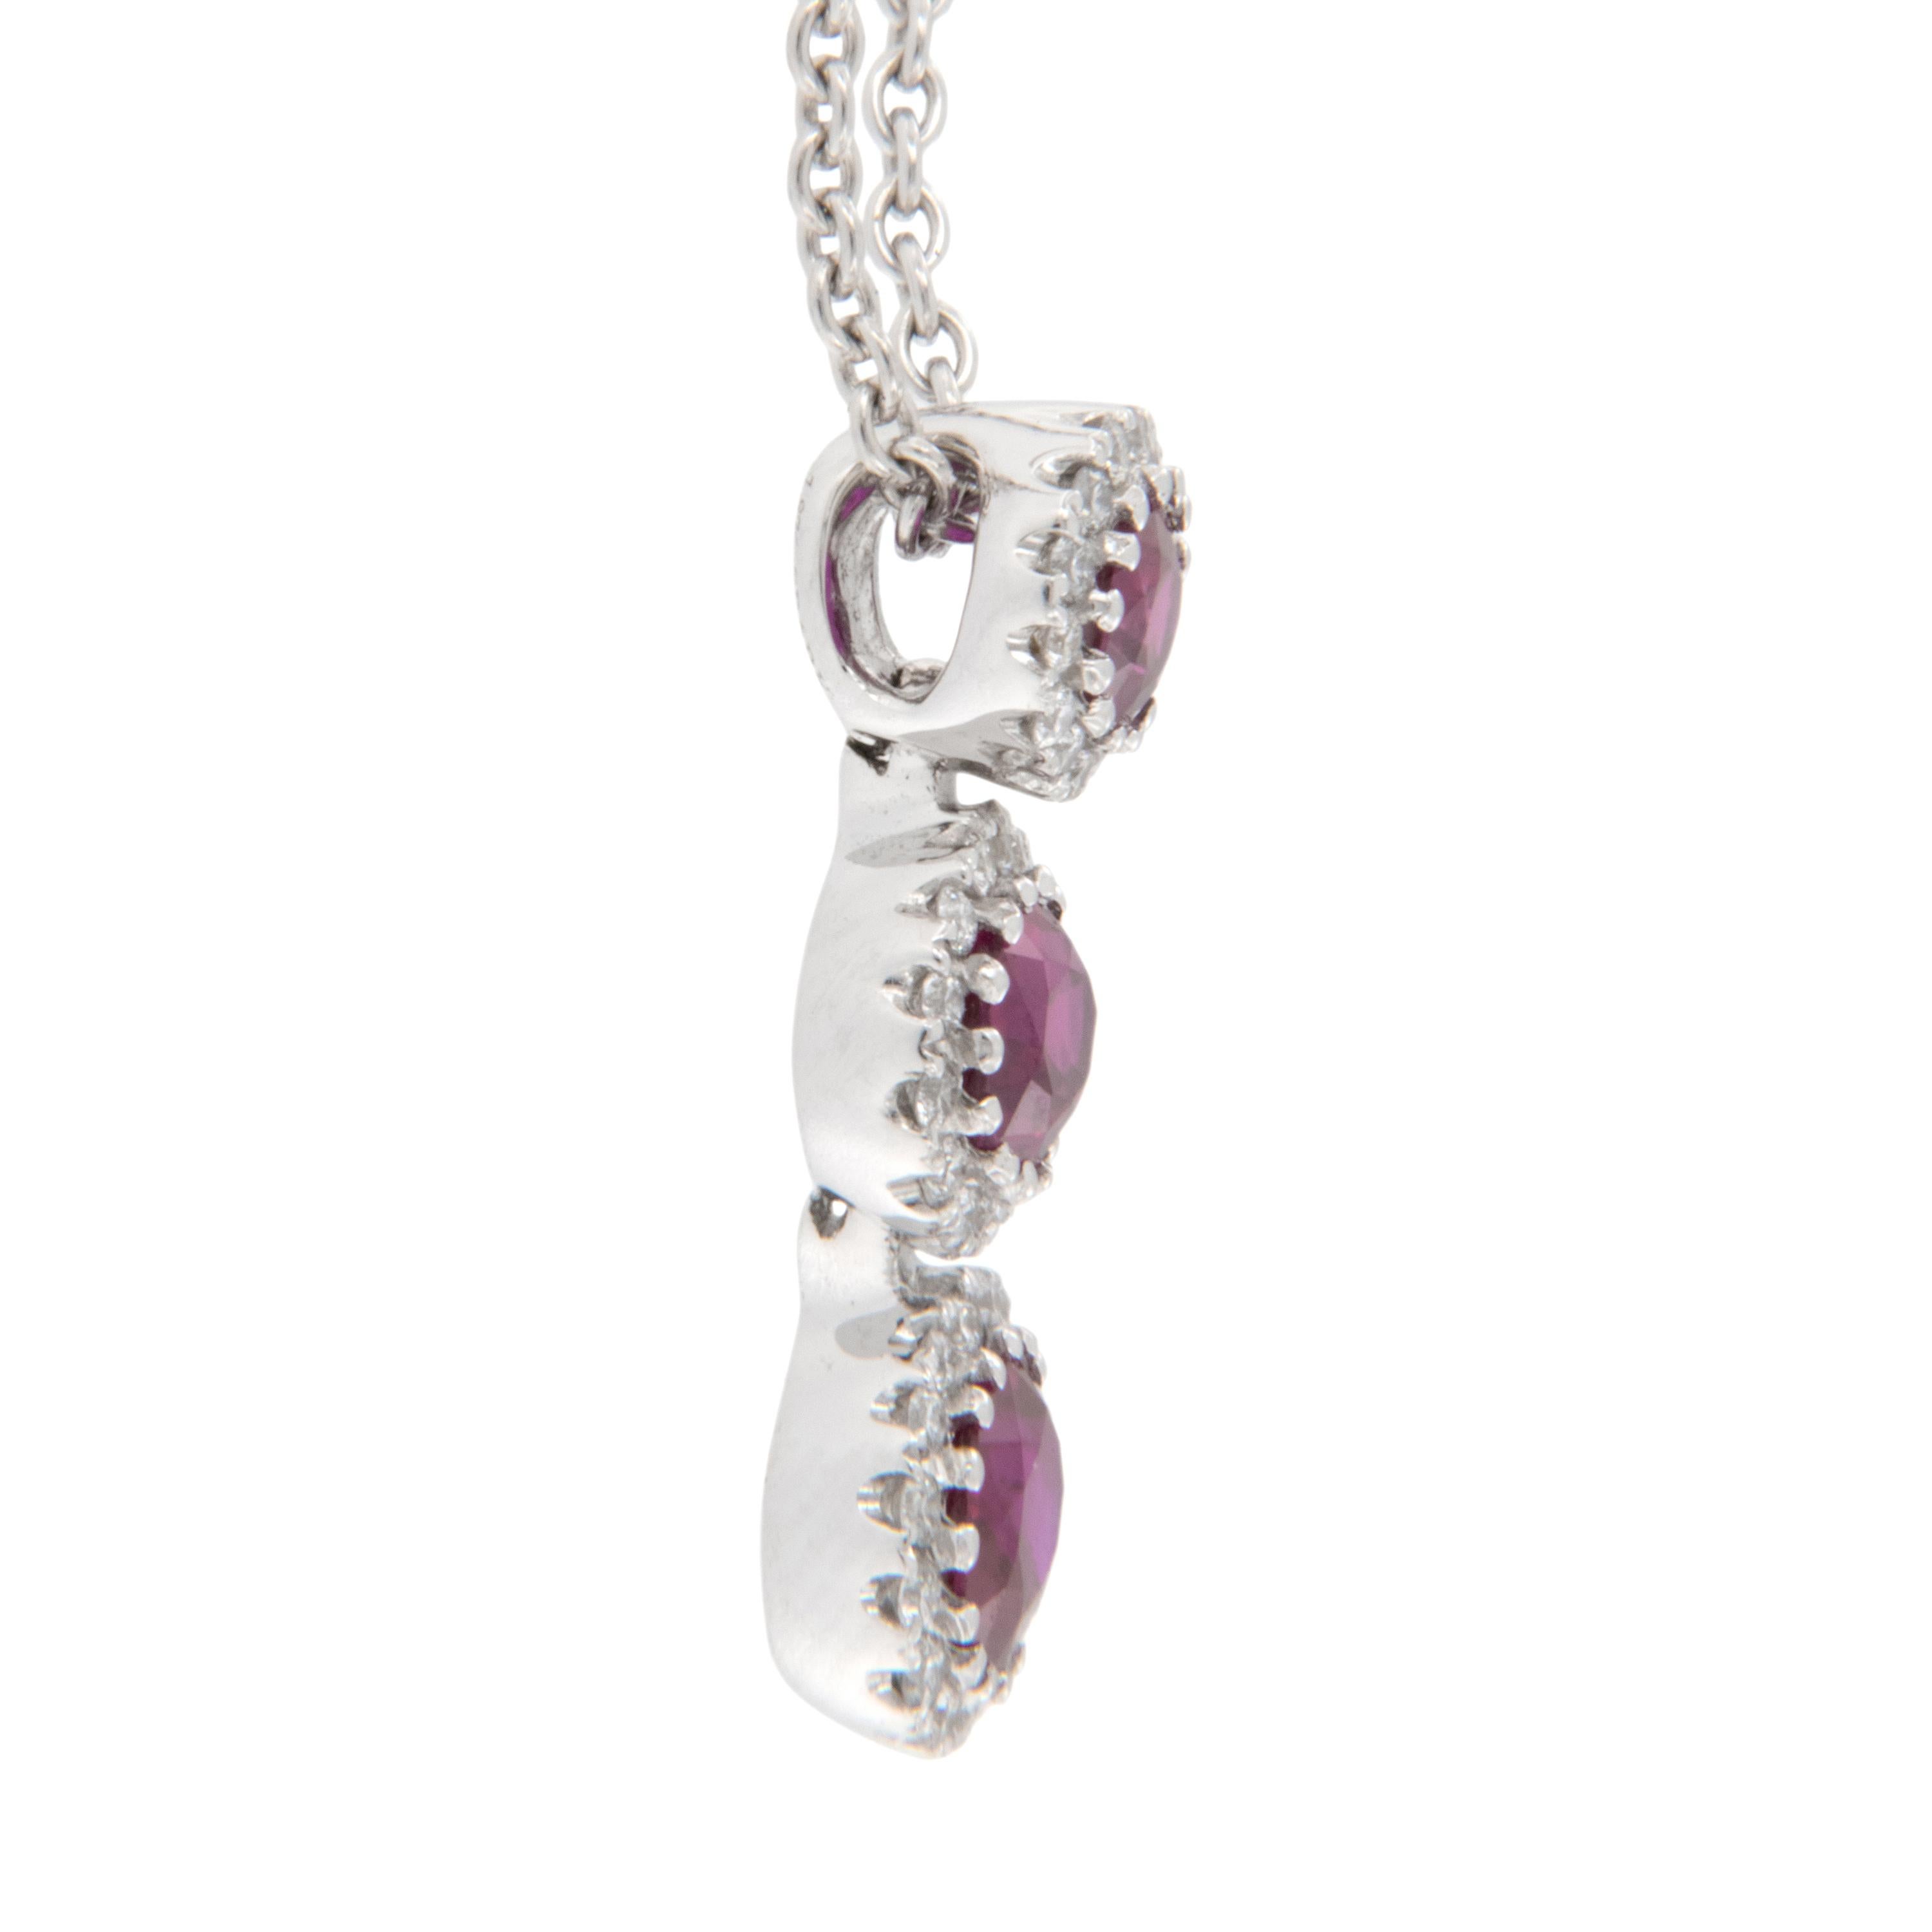 Spark Creations are well known for their yummy rubies, sapphires & emeralds! This 18 karat white gold 3 oval ruby drop necklace is a testament to exactly that! With 1.08 Cttw of fine red rubies &  .18 Cttw of fine diamonds this necklace will lay